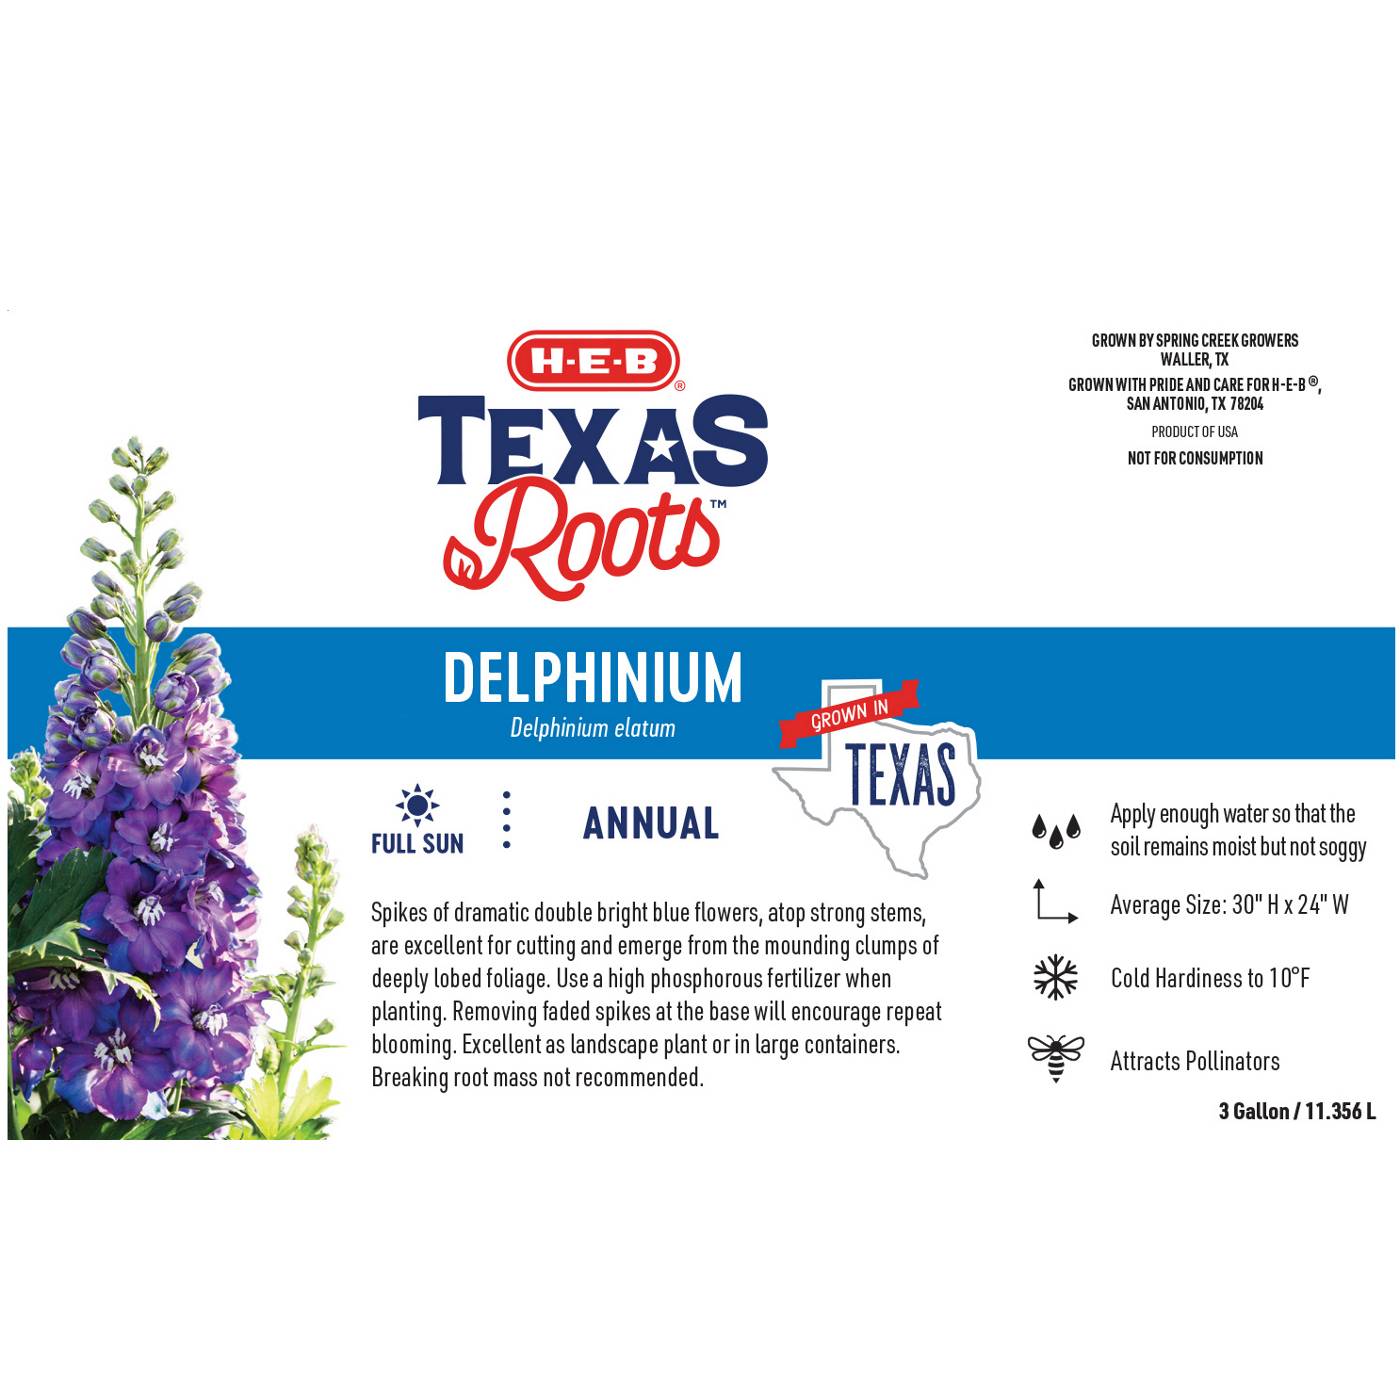 H-E-B Texas Roots Blue Guardian Potted Delphinium; image 2 of 2